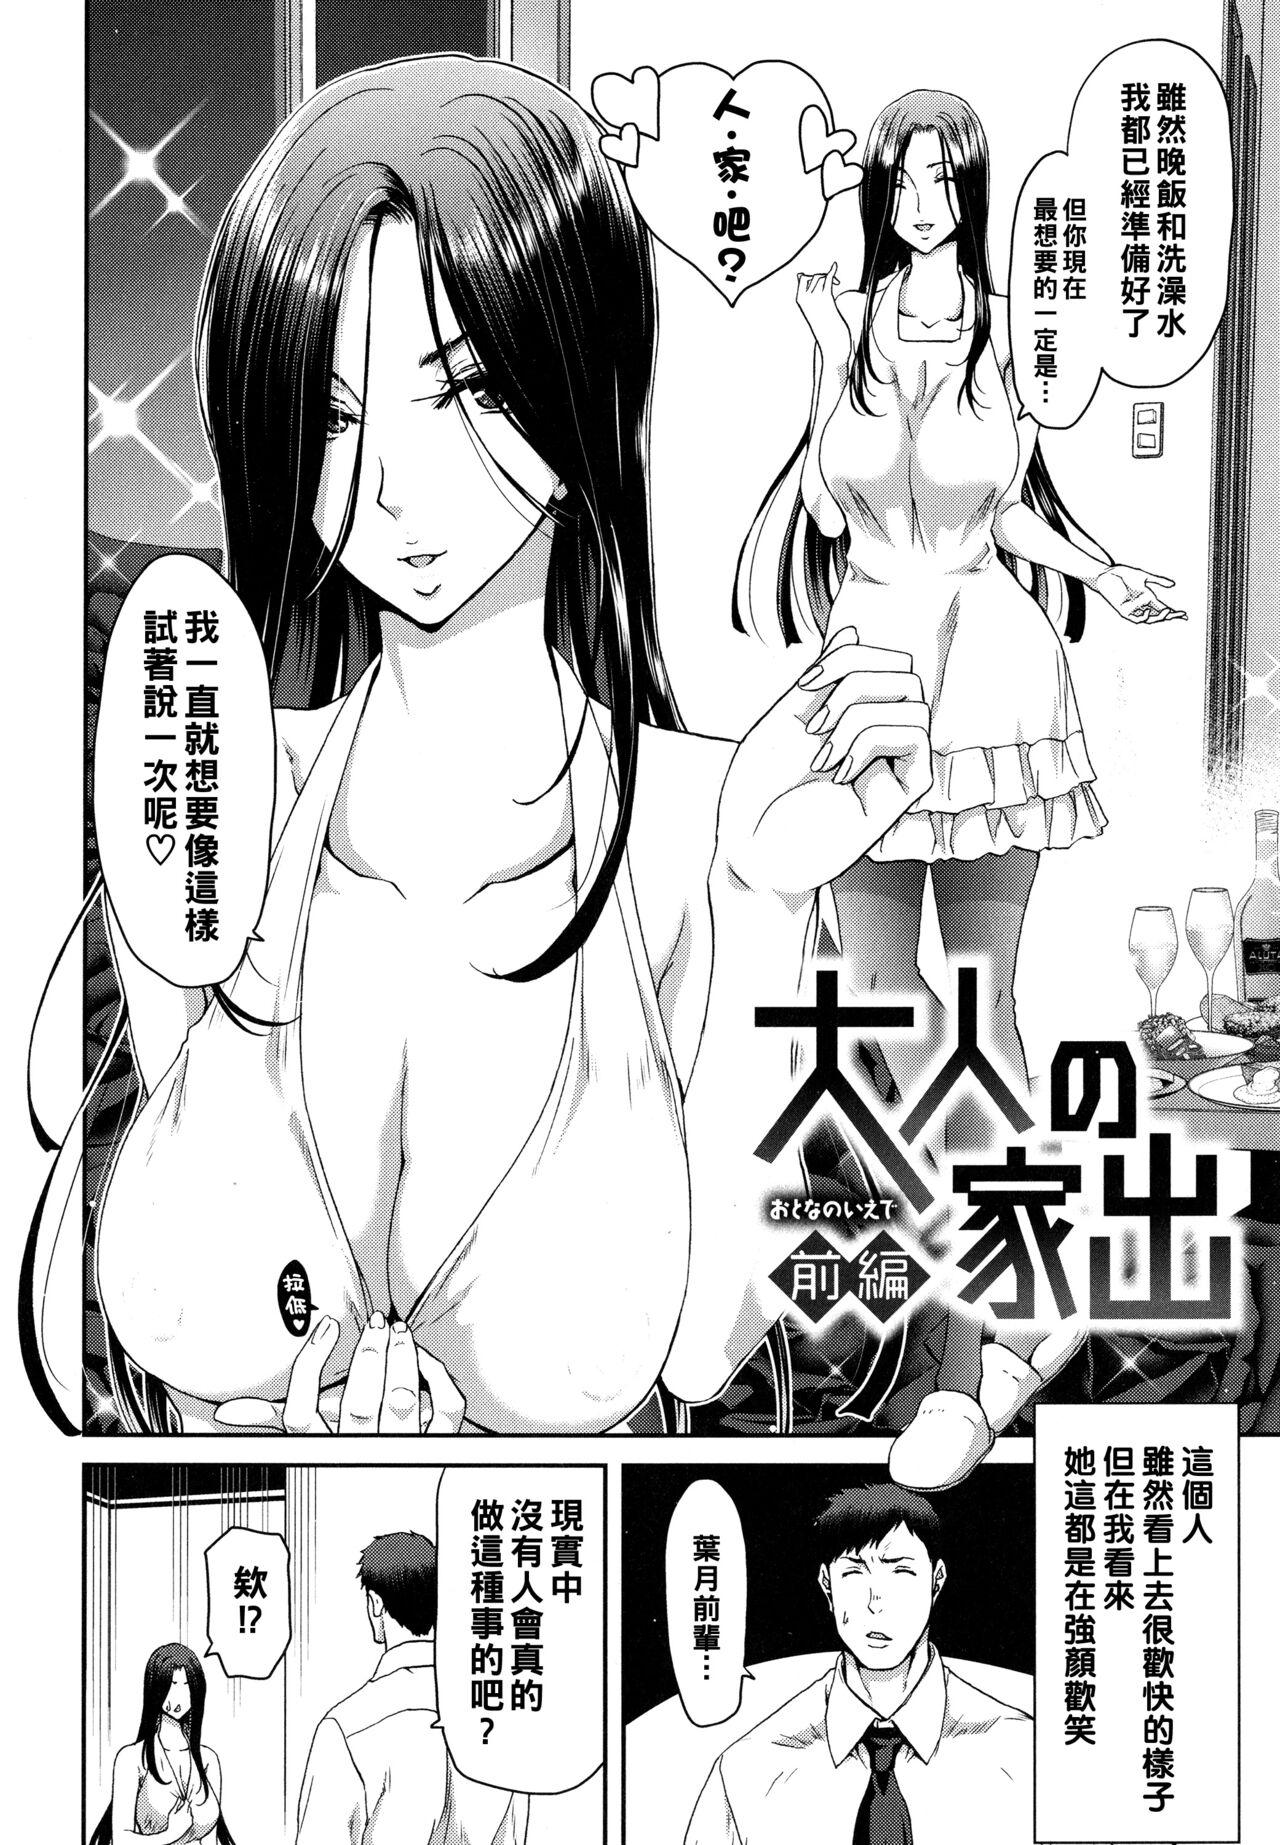 Special Locations Iede Onna o Hirottara - When I picked up a runaway girl. Sex Tape - Page 6